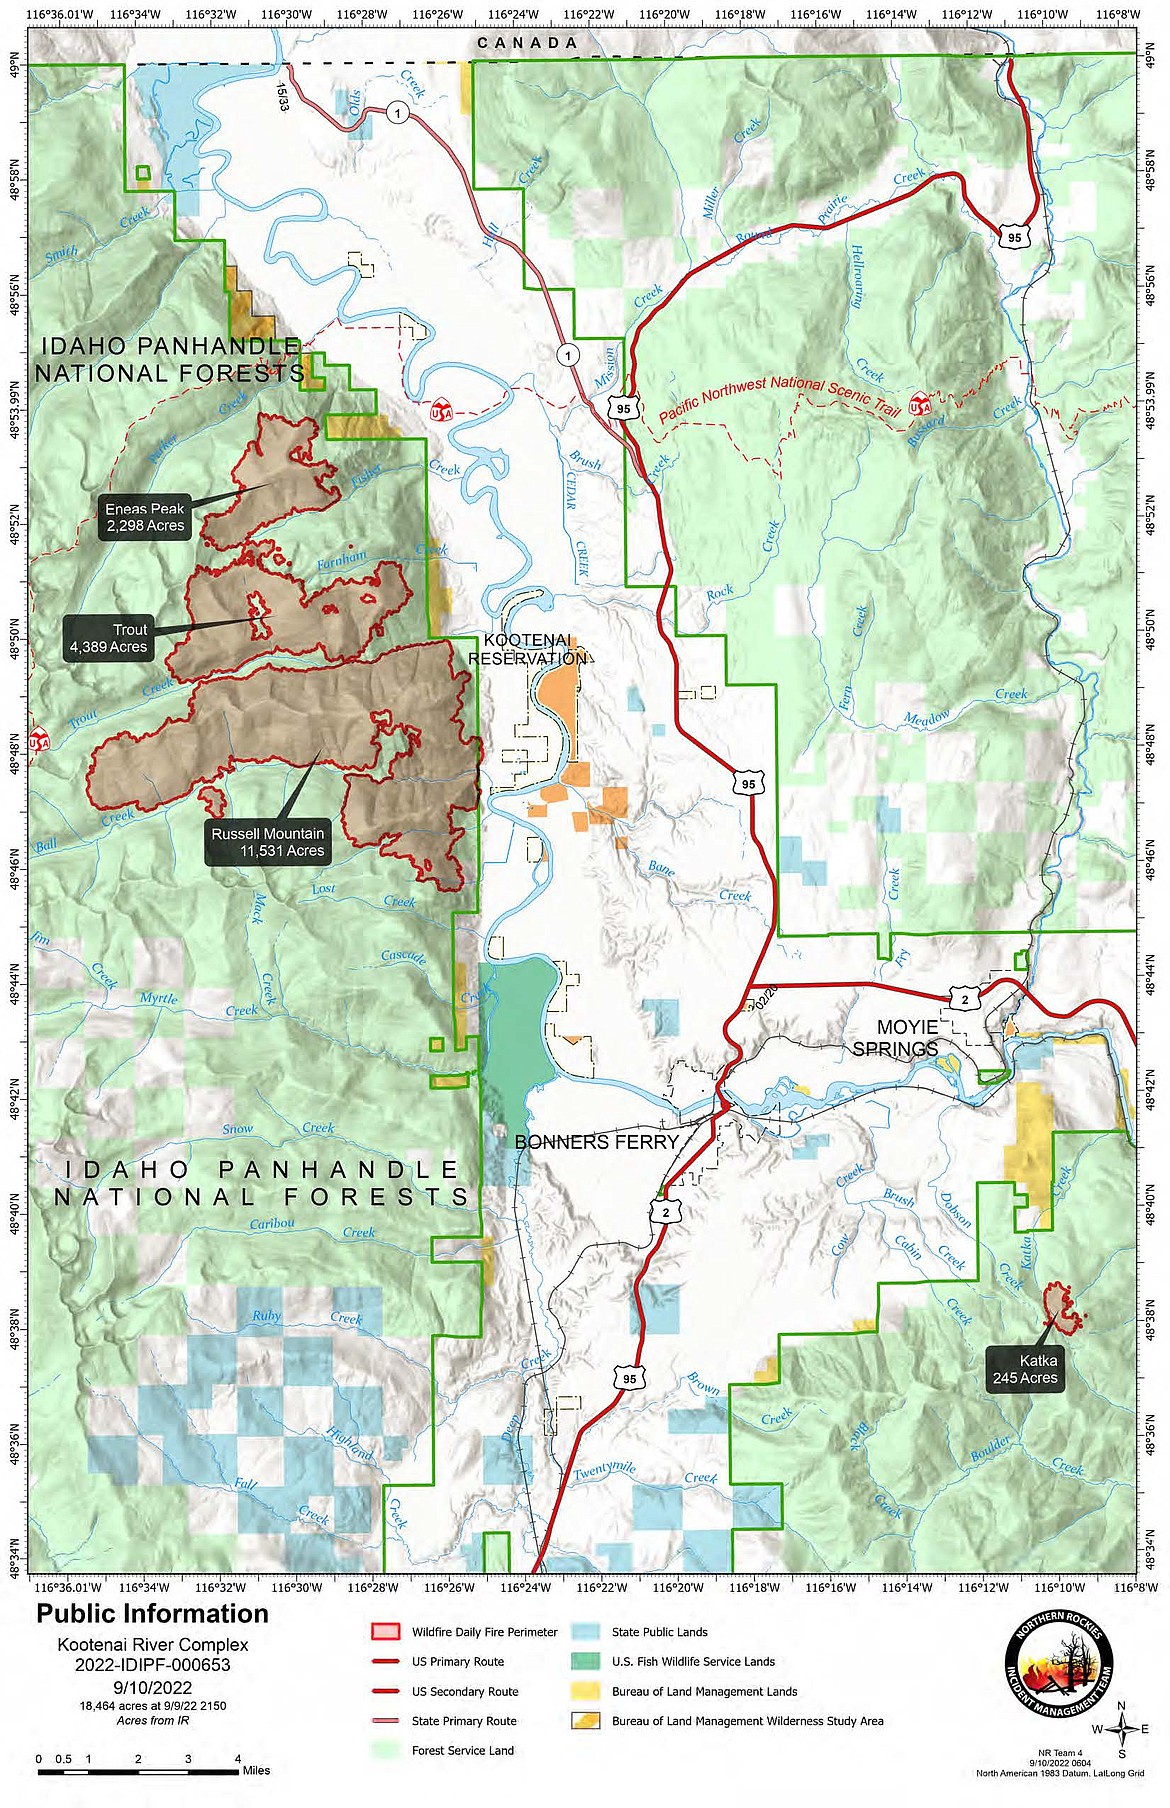 A map showing the Kootenai River Complex Fires.